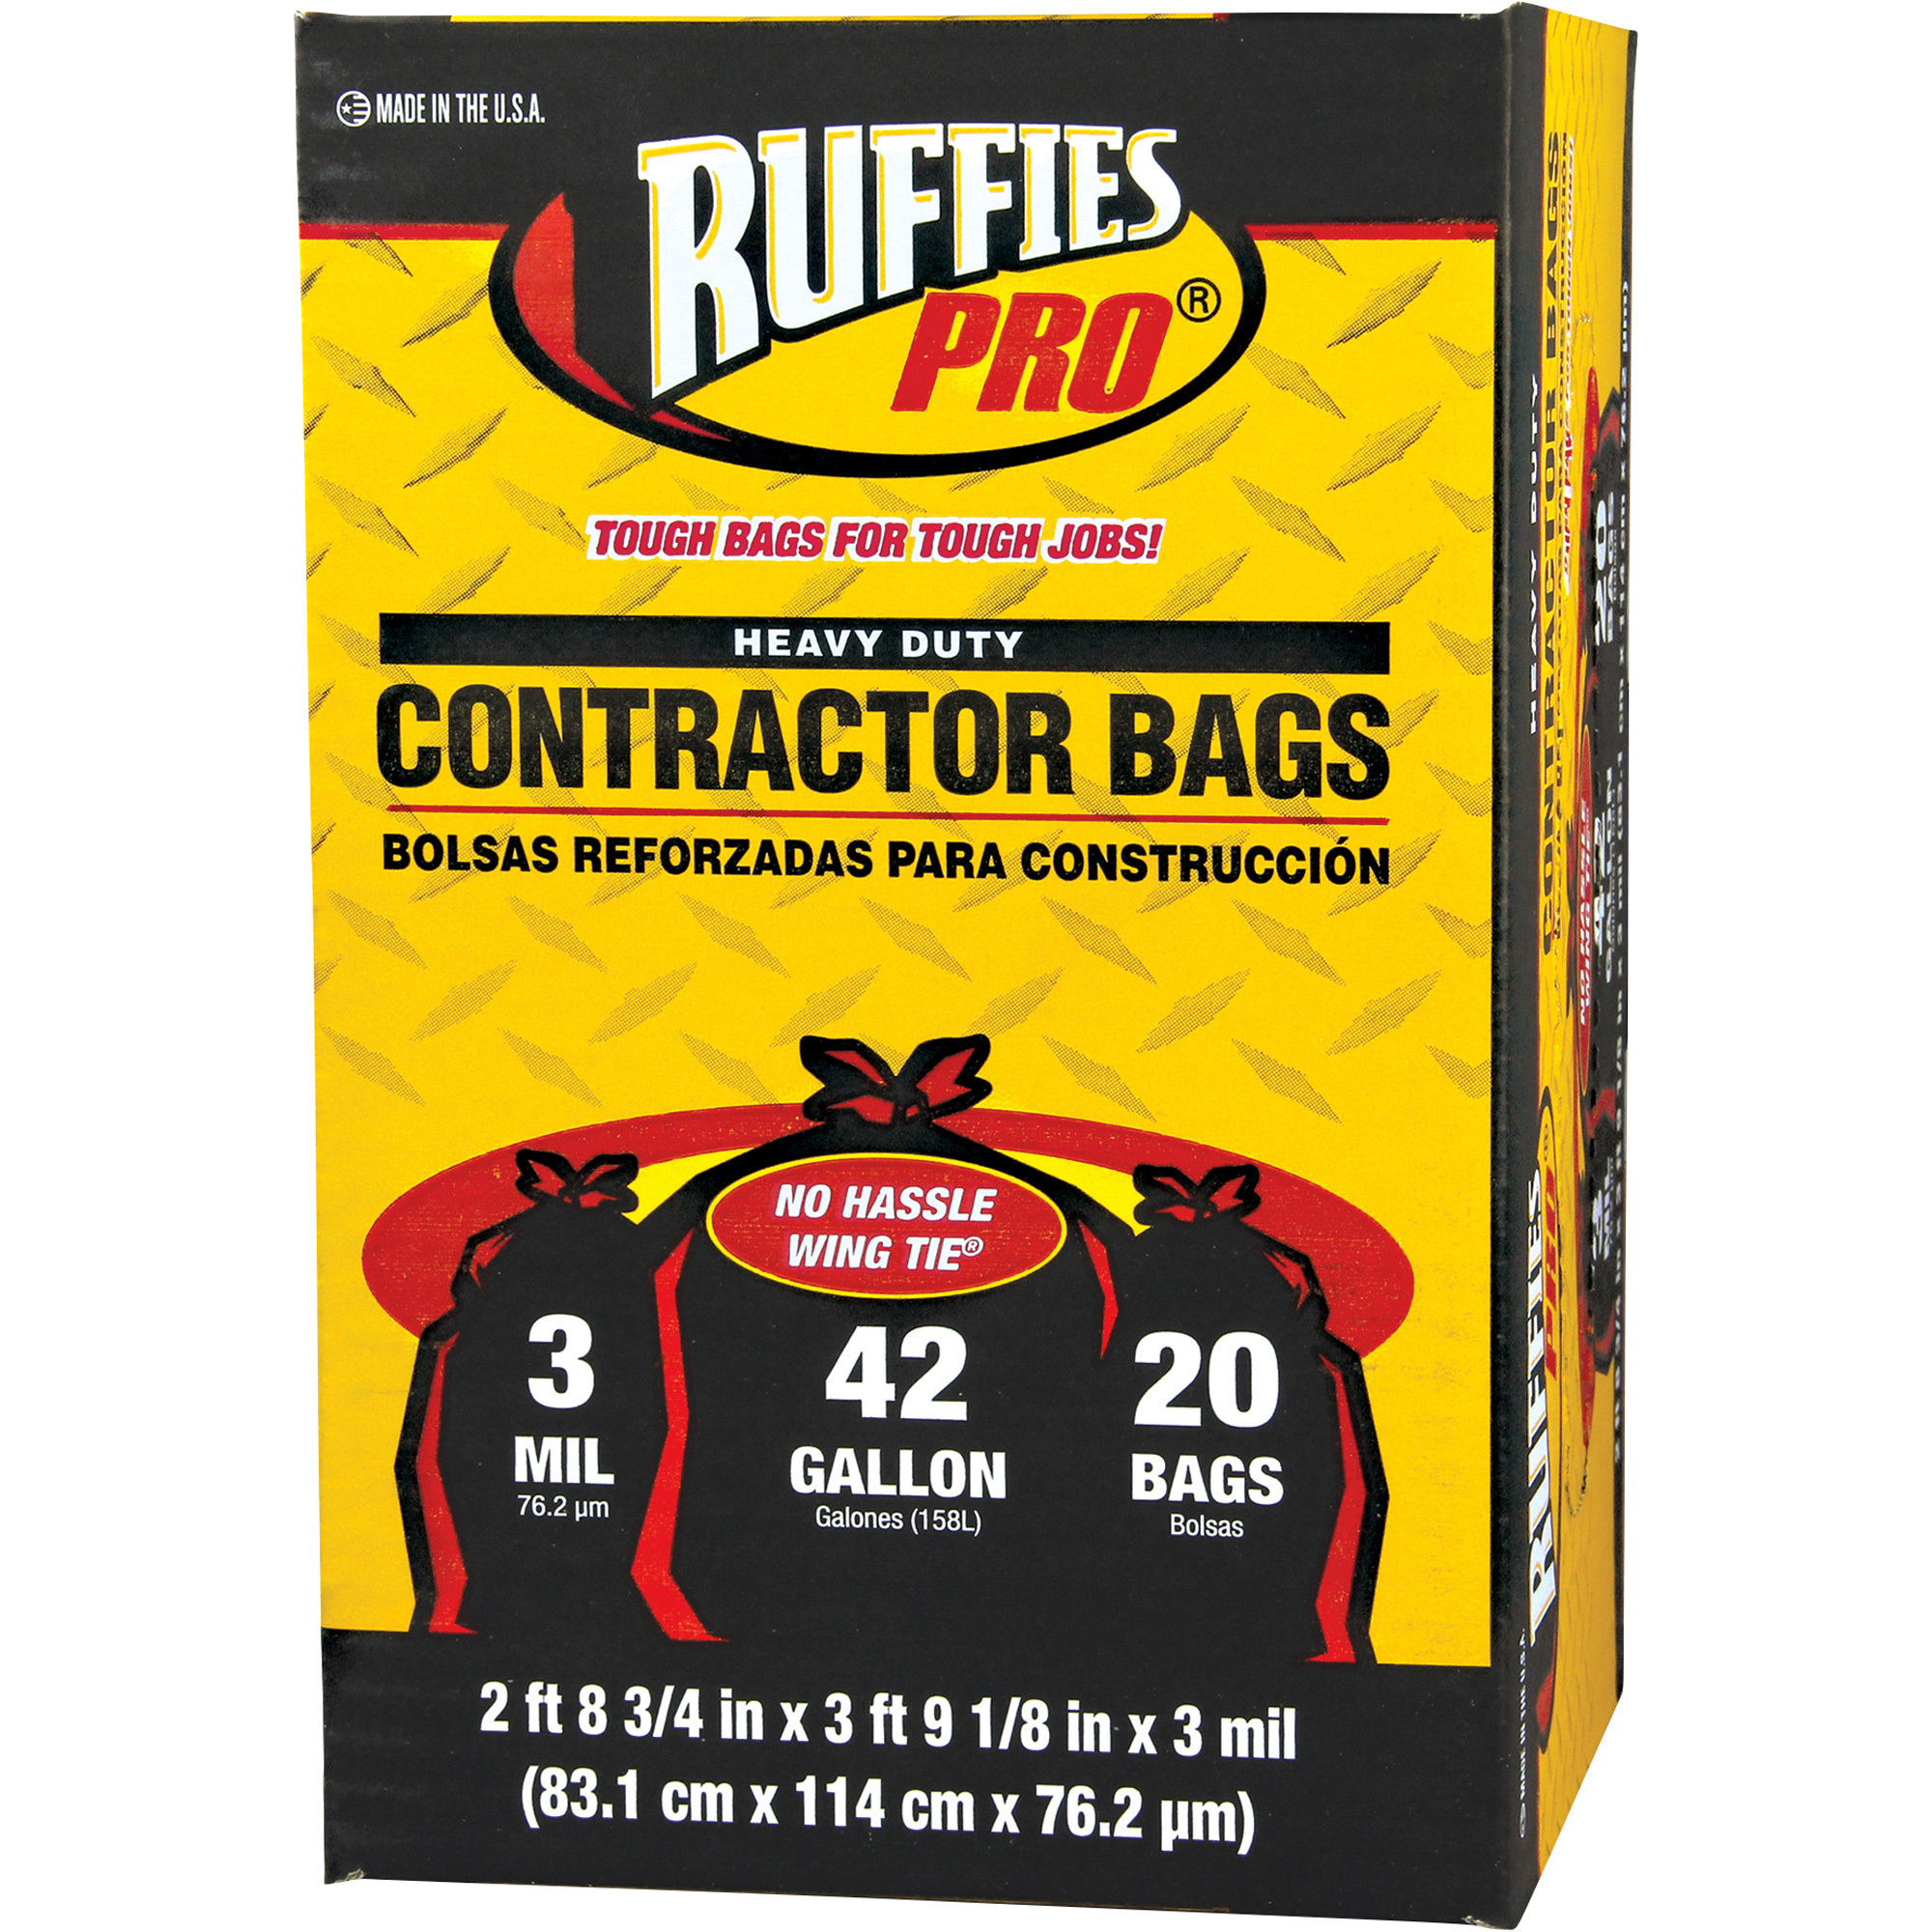 Ruffies Pro 42-Gallon Contractor Bags, 20-Count, 3 Mil, Wing Tie